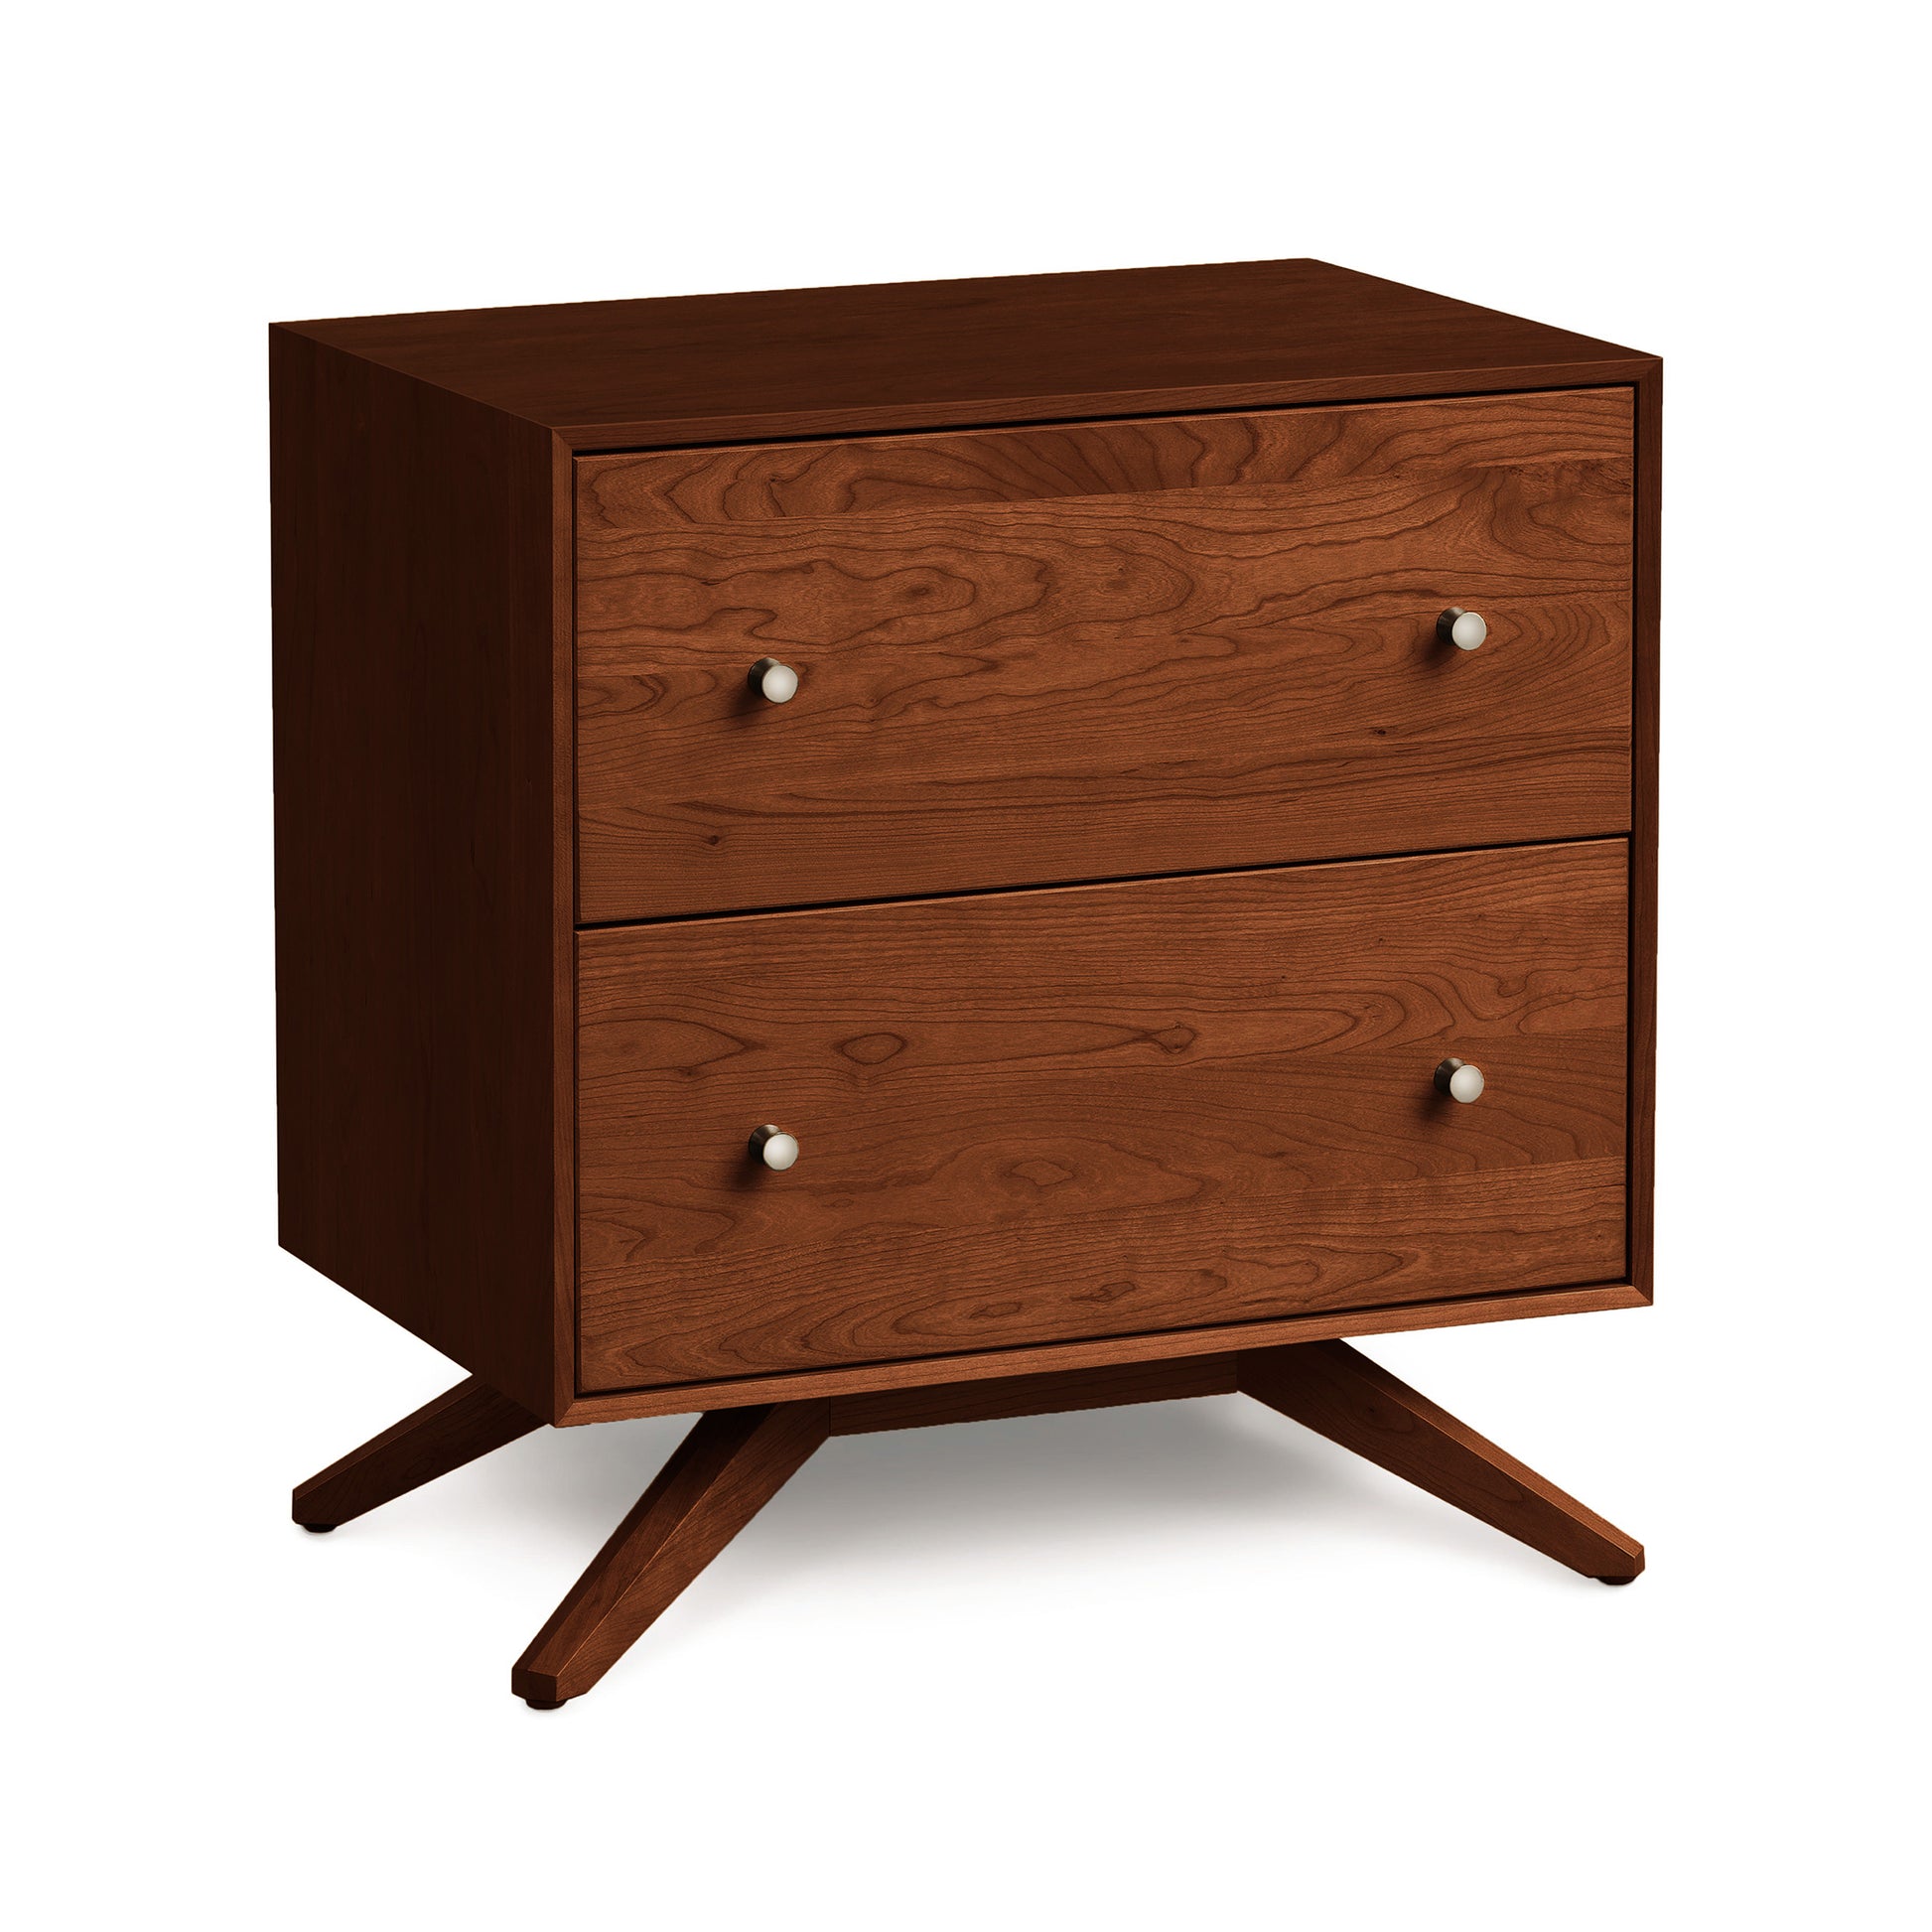 A Copeland Furniture Astrid 2-Drawer Nightstand with two drawers and splayed legs.